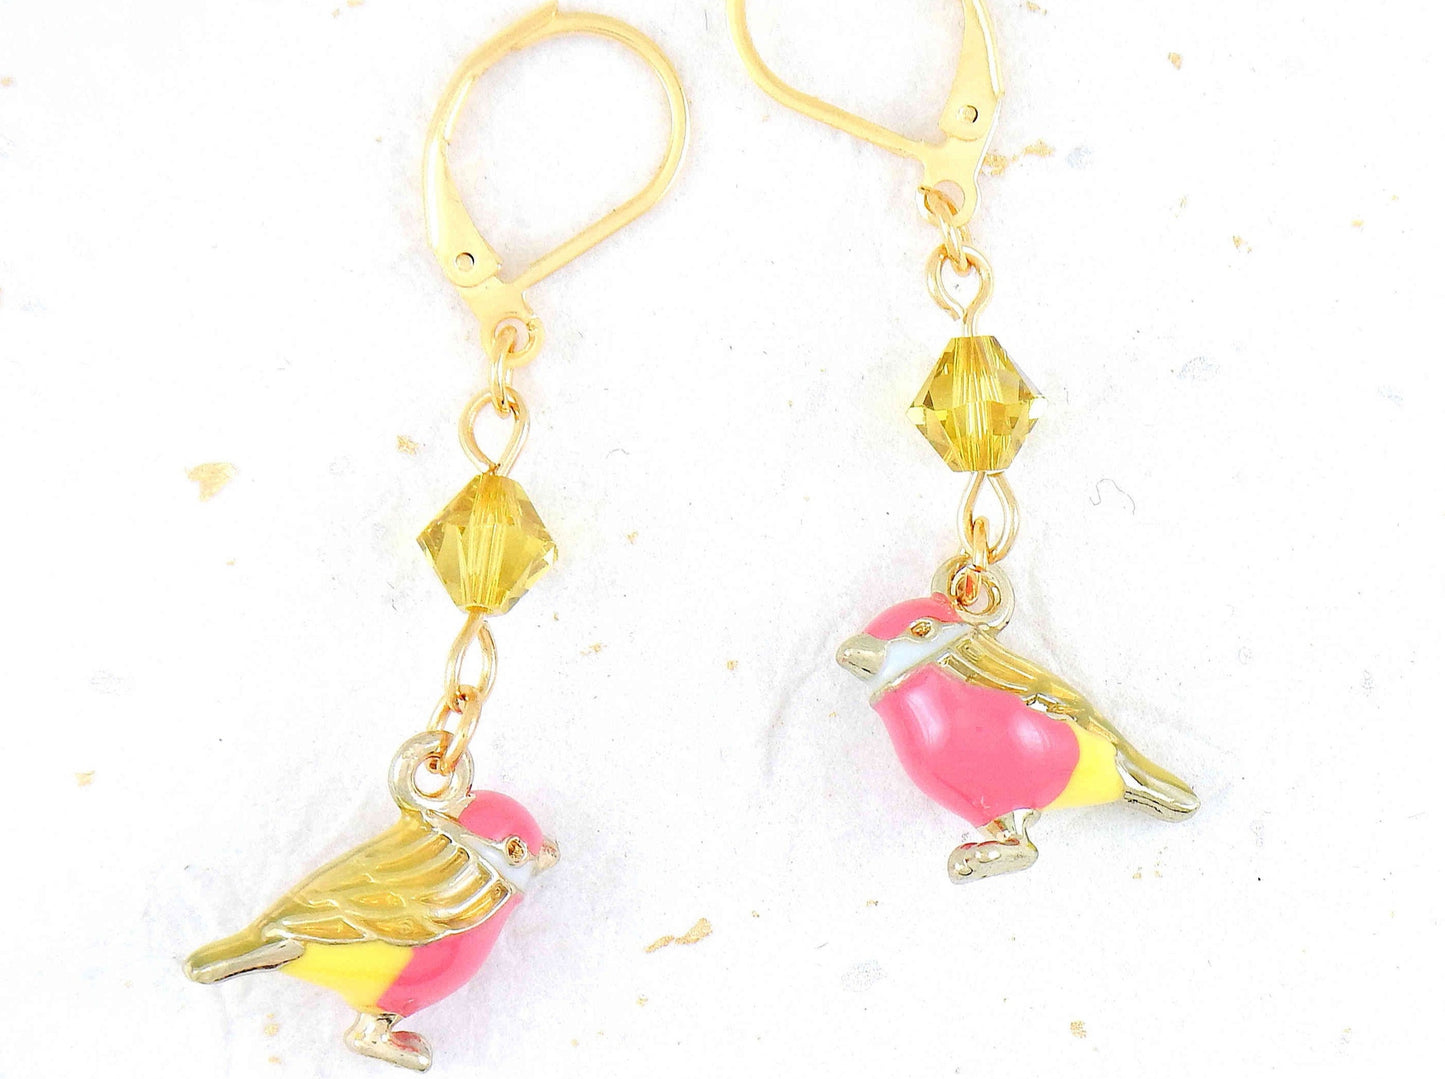 Short earrings with small plump enamelled birds in 2 colours, Swarovski crystals, gold-toned stainless steel lever back hooks